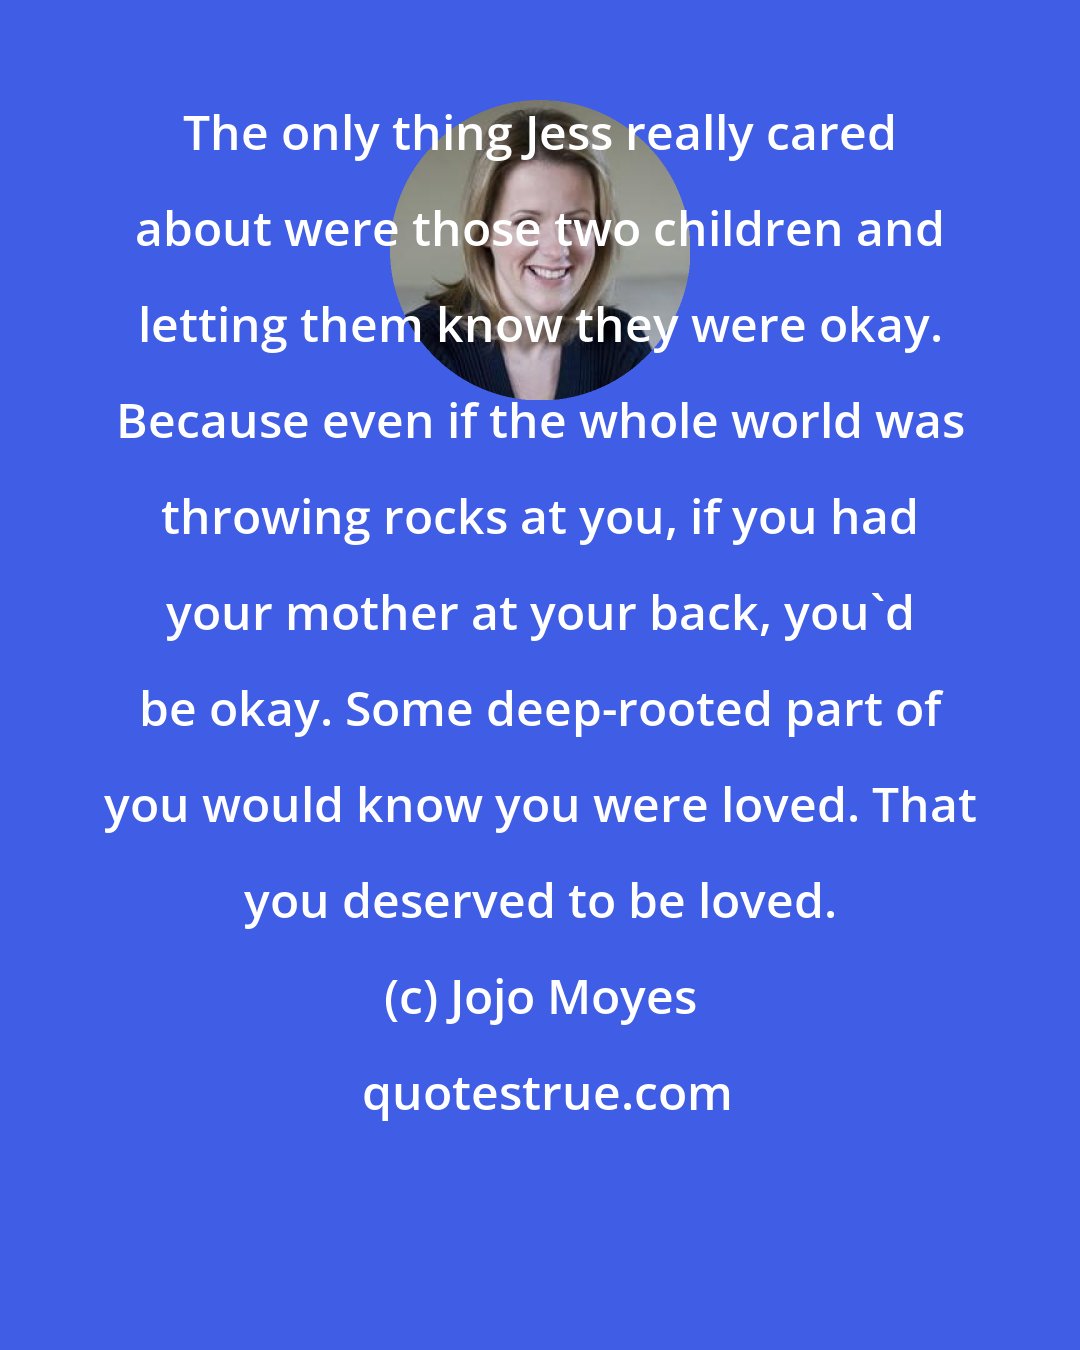 Jojo Moyes: The only thing Jess really cared about were those two children and letting them know they were okay. Because even if the whole world was throwing rocks at you, if you had your mother at your back, you'd be okay. Some deep-rooted part of you would know you were loved. That you deserved to be loved.